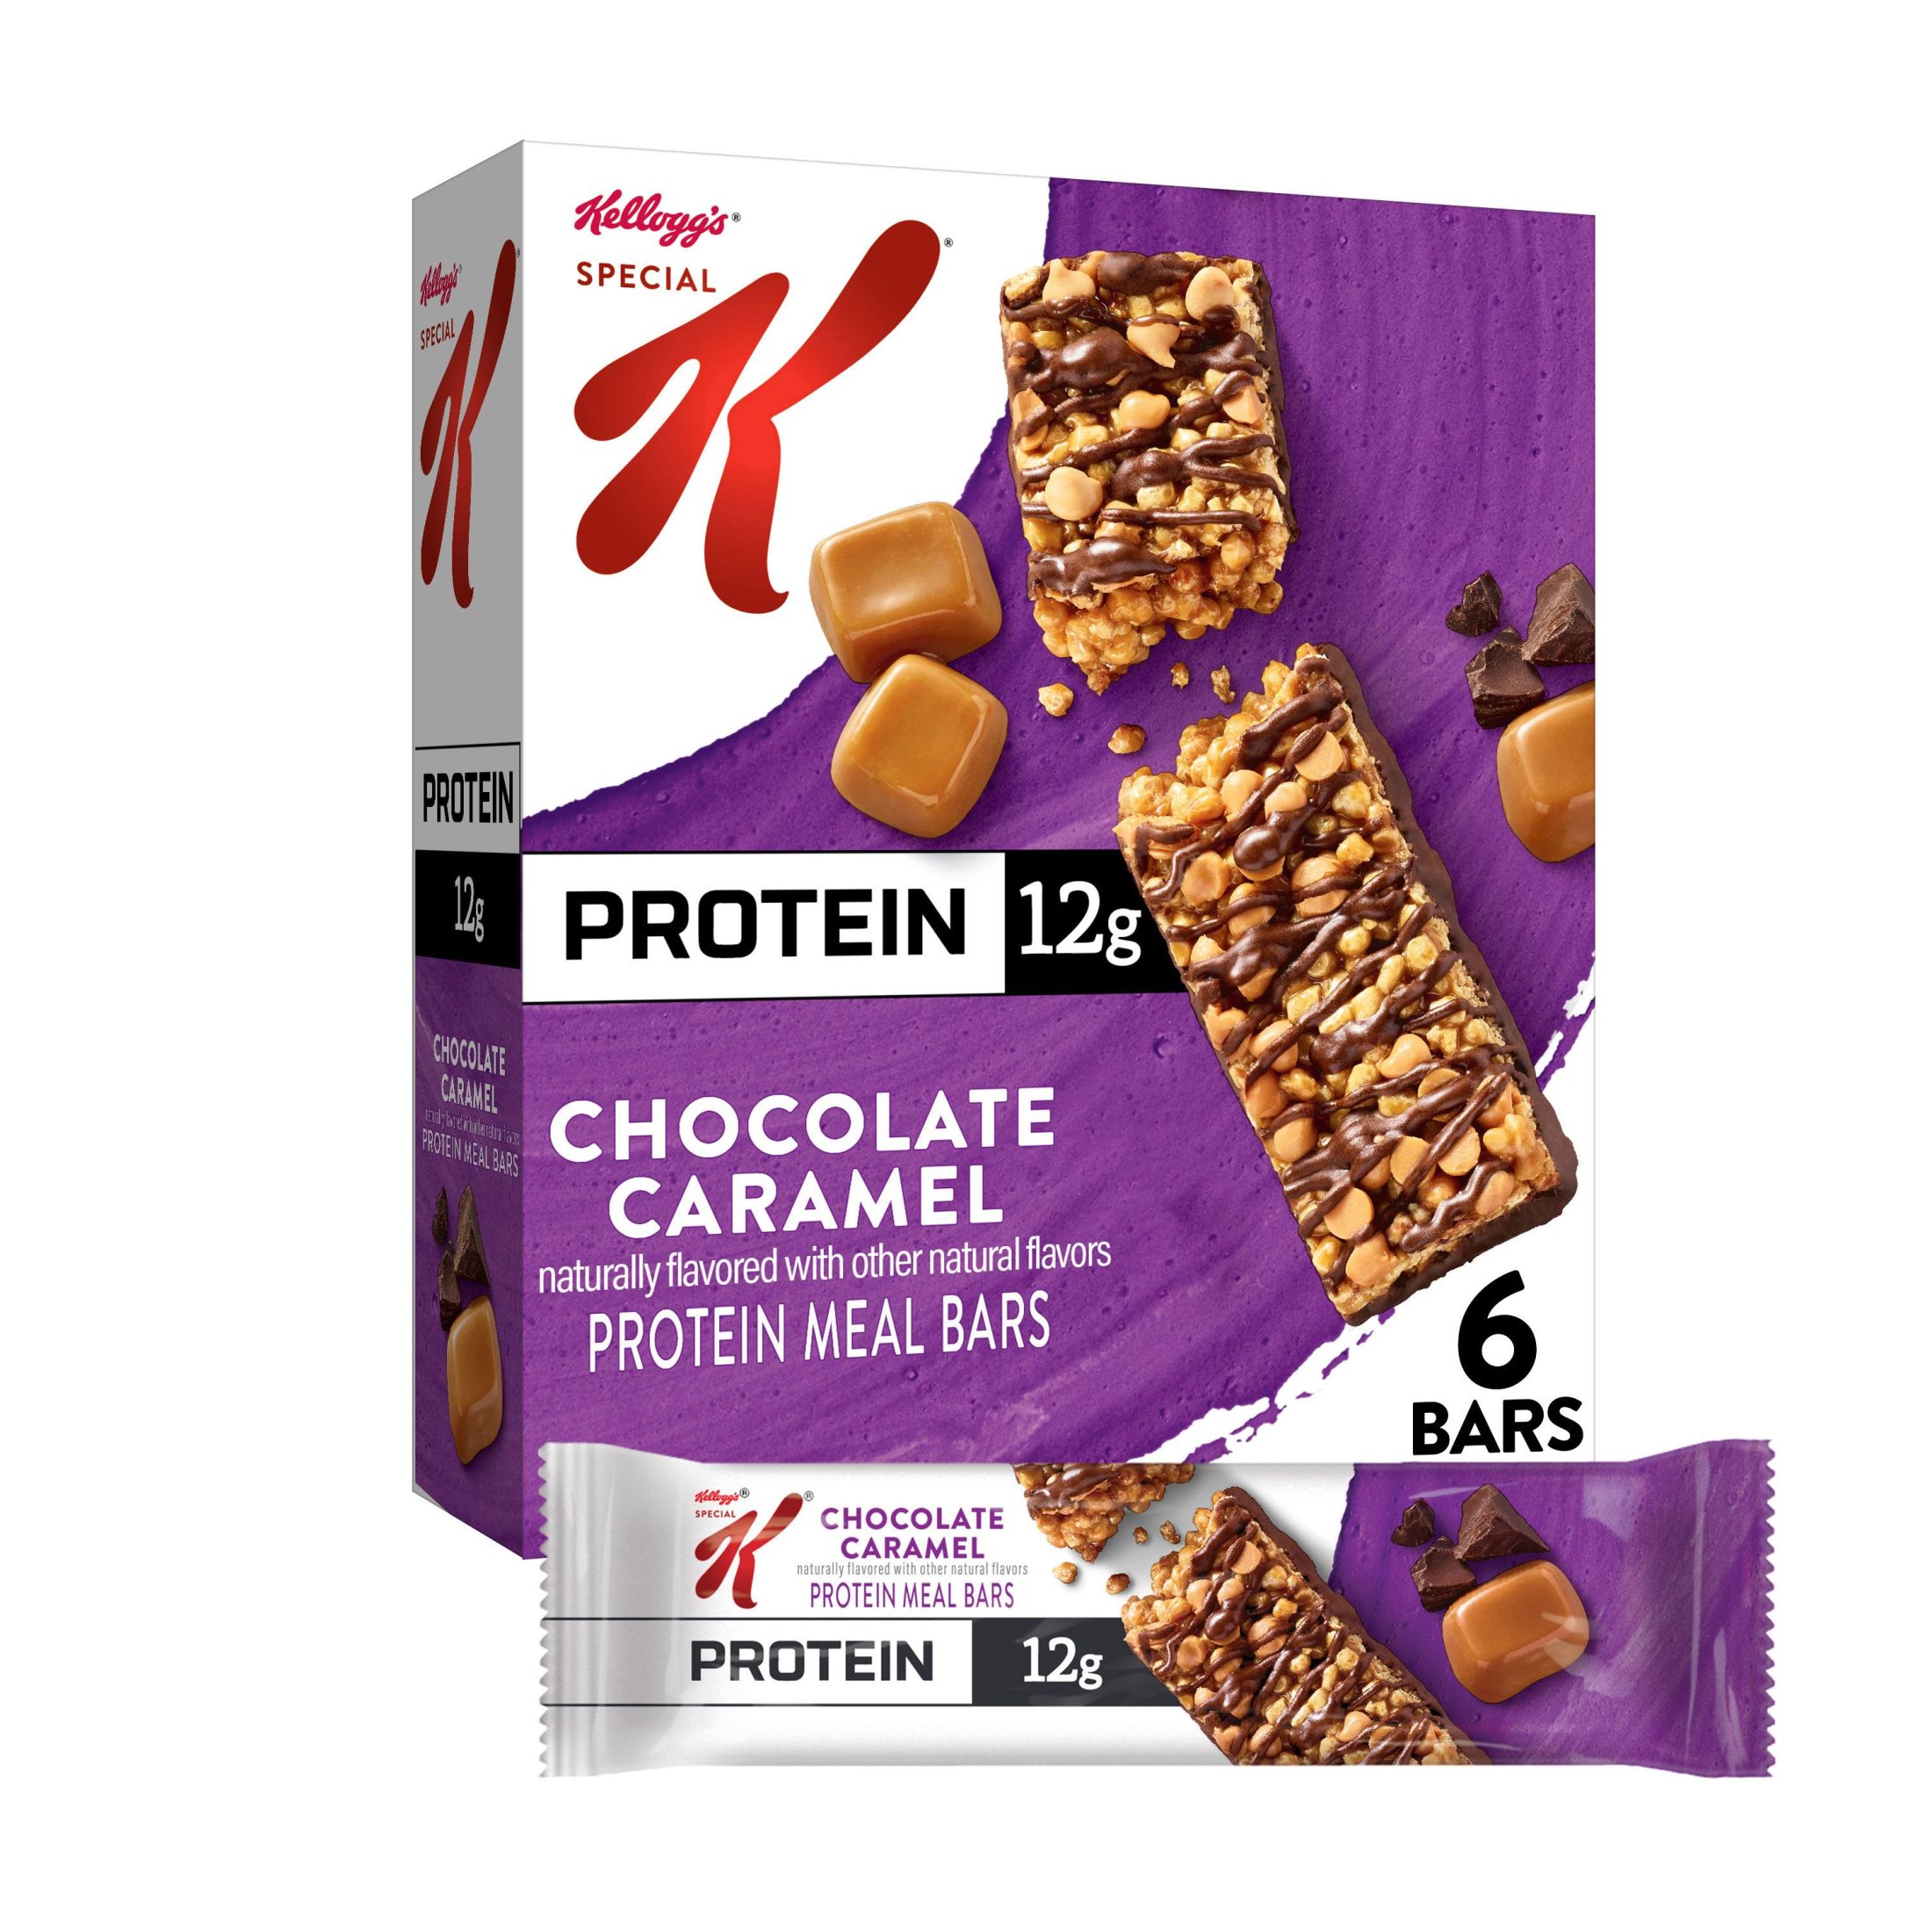 Kellogg's Special K Chocolate Caramel Chewy Protein Bars, Ready-to-Eat, 9.5 oz, 6 Count - image 1 of 11